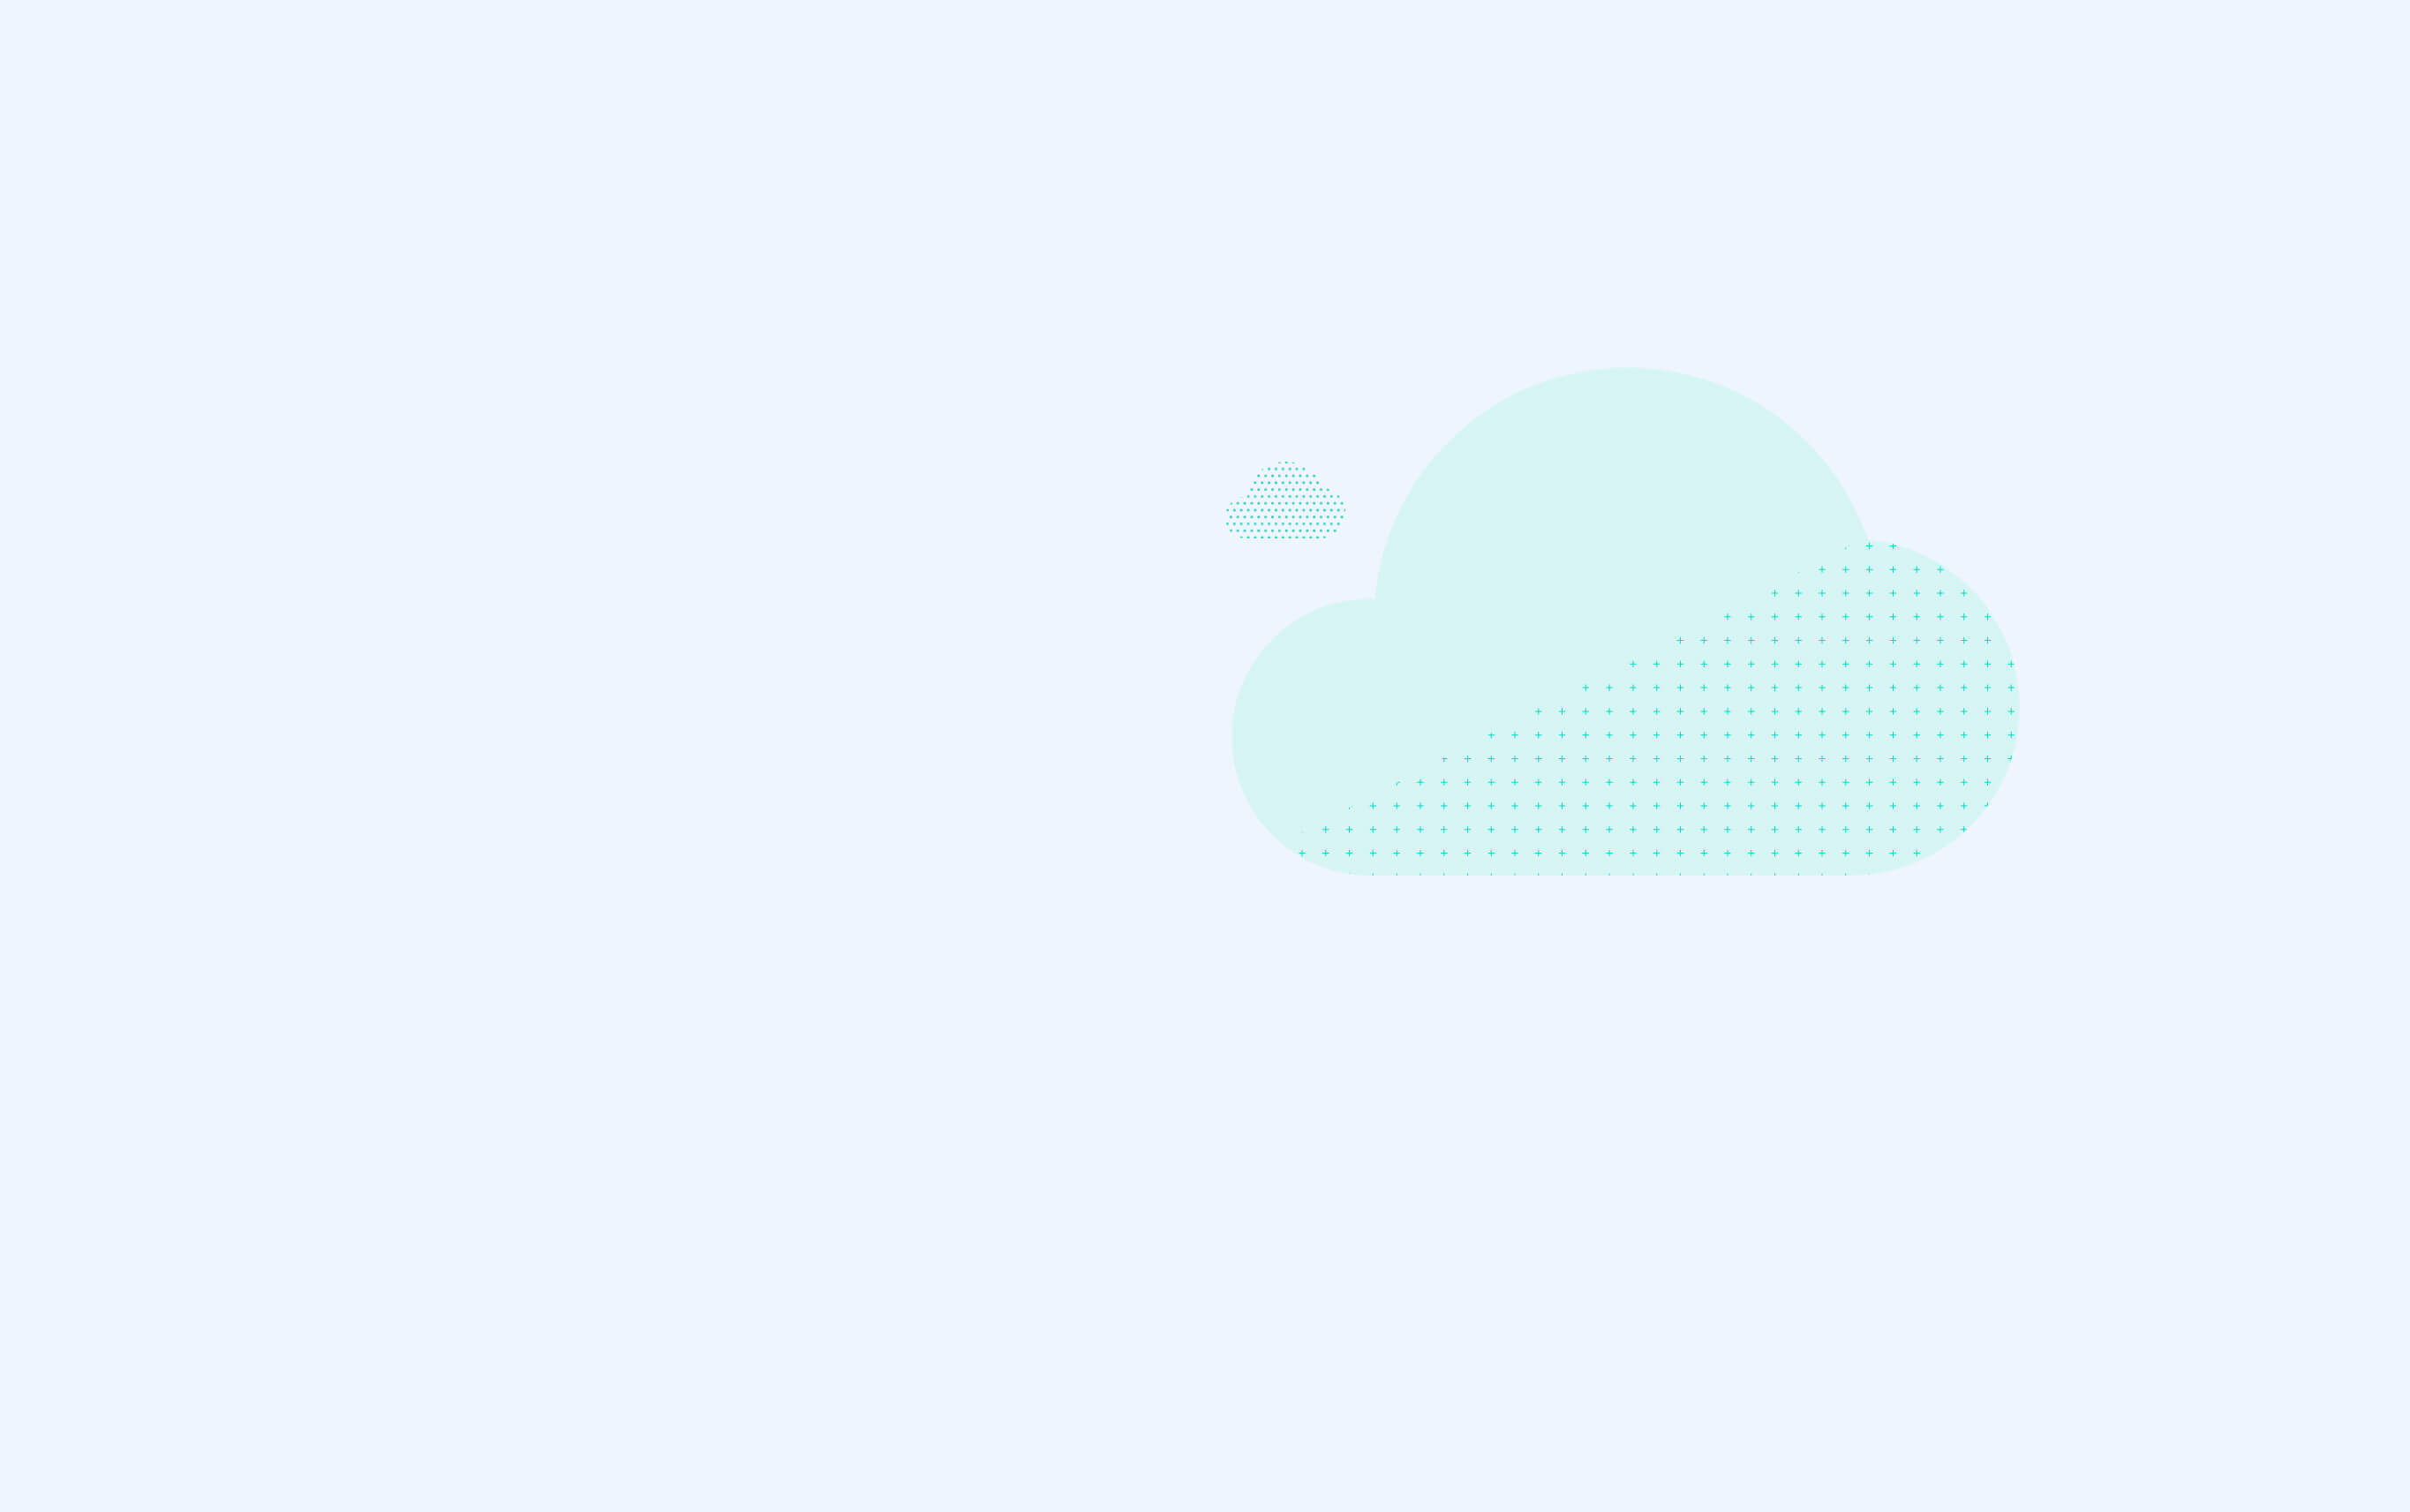 About Us page - Cloud